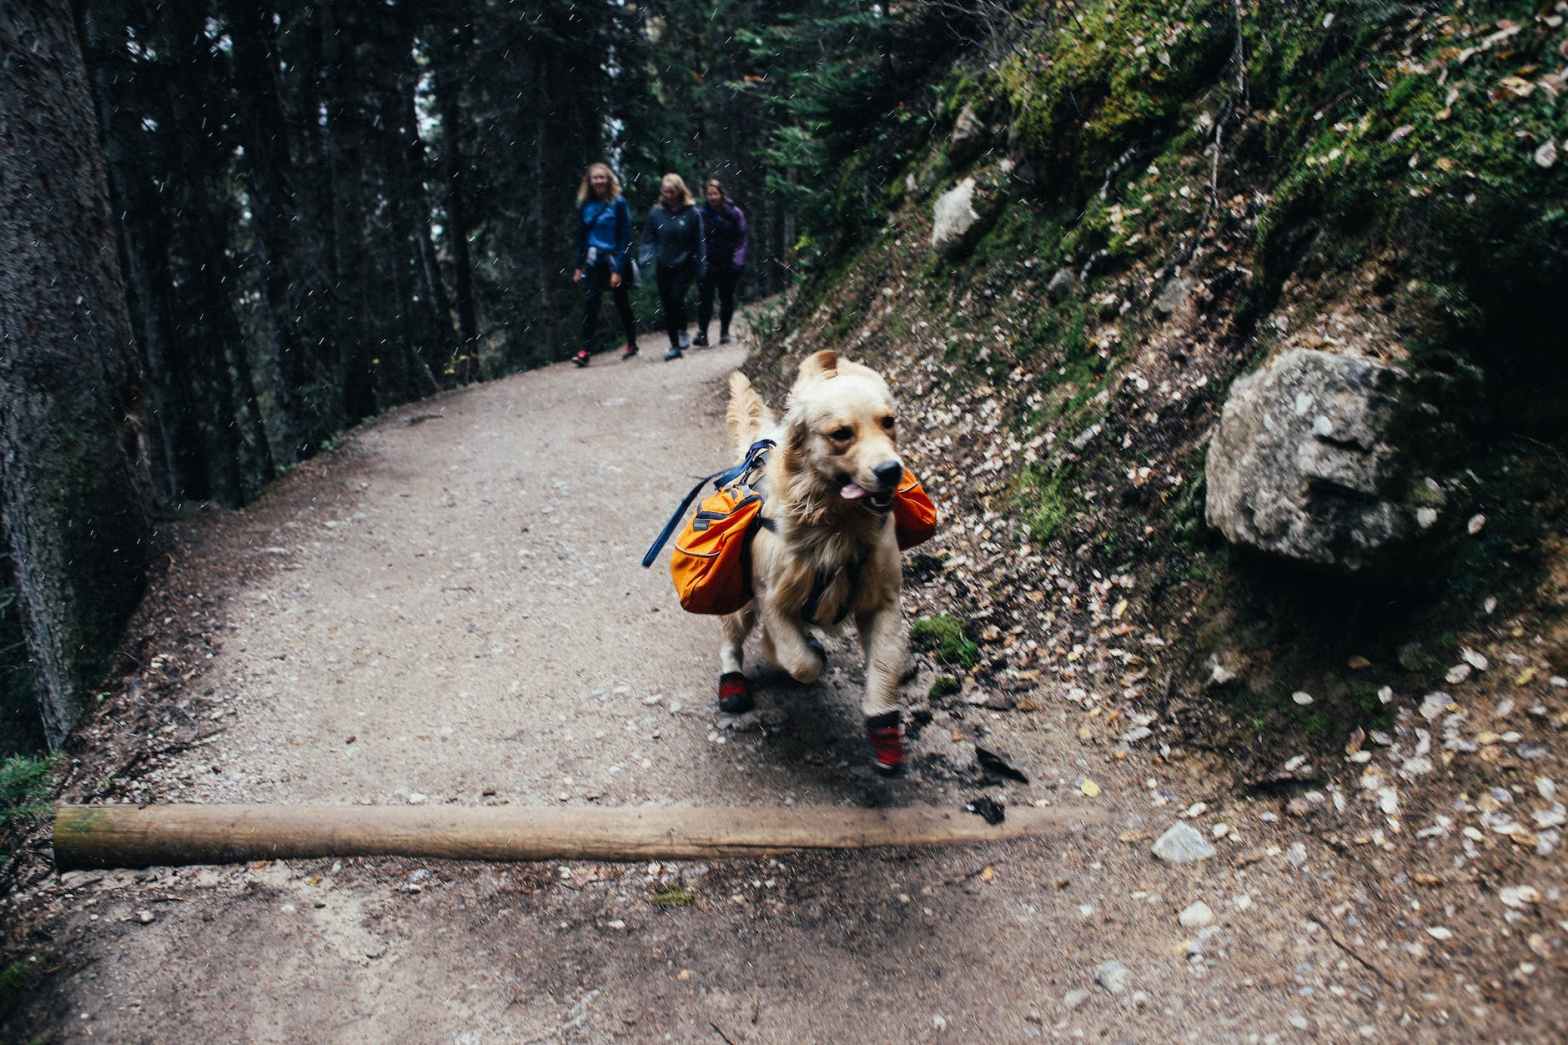 Wagging Tales: The Best Dog-Friendly Travel Destinations